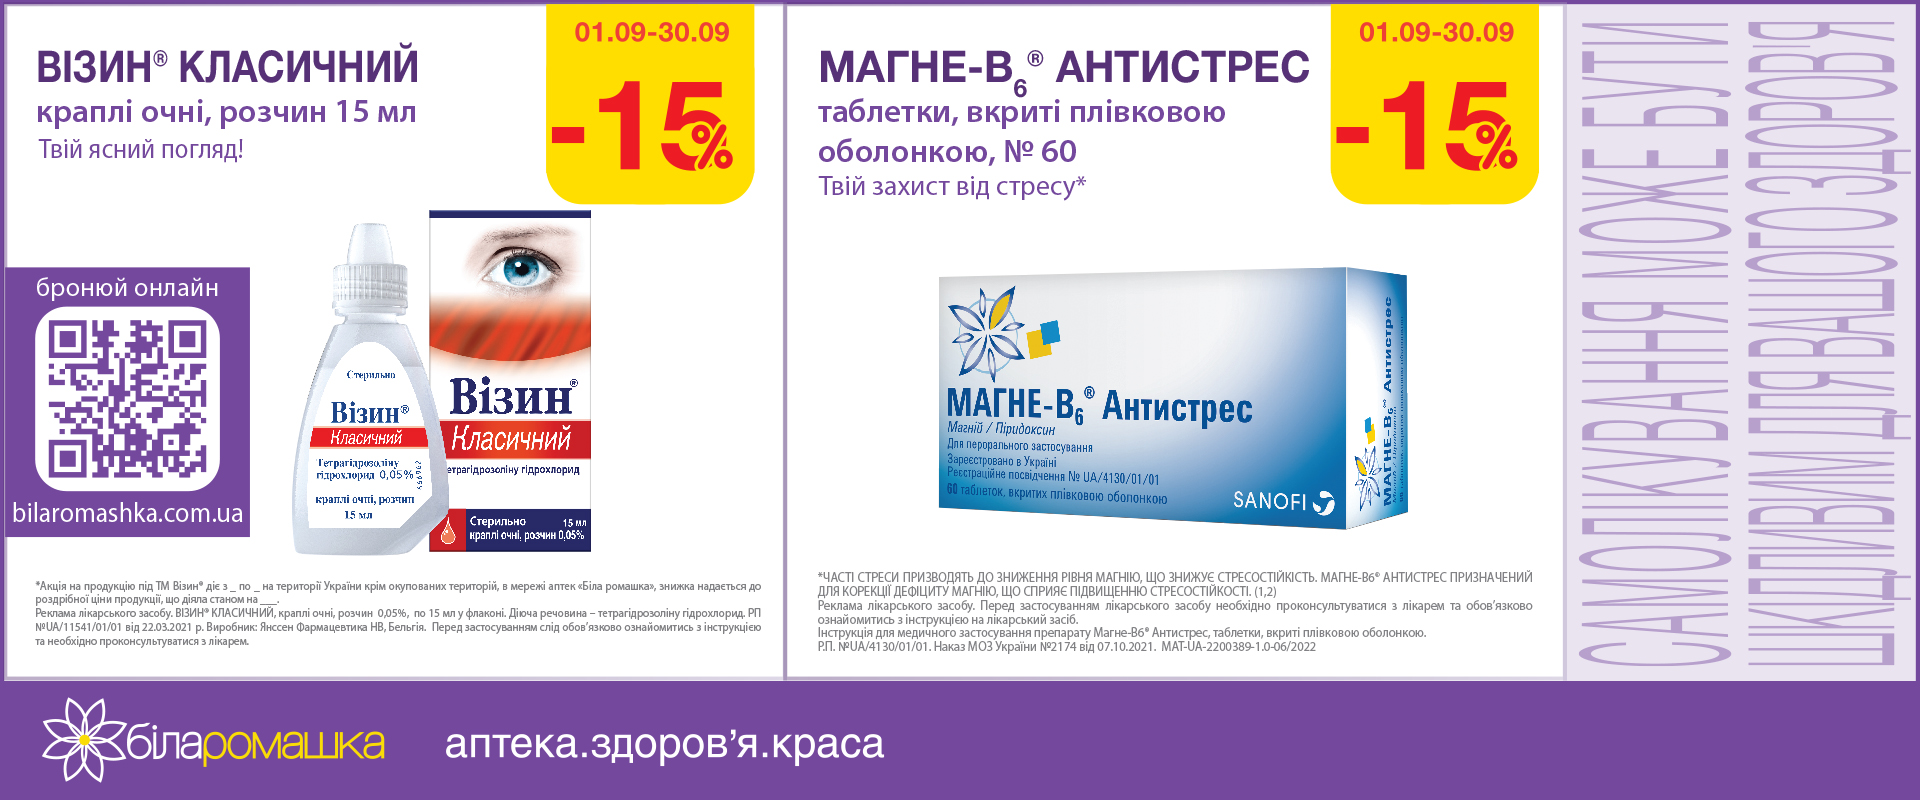 Promotions on various medicinal products